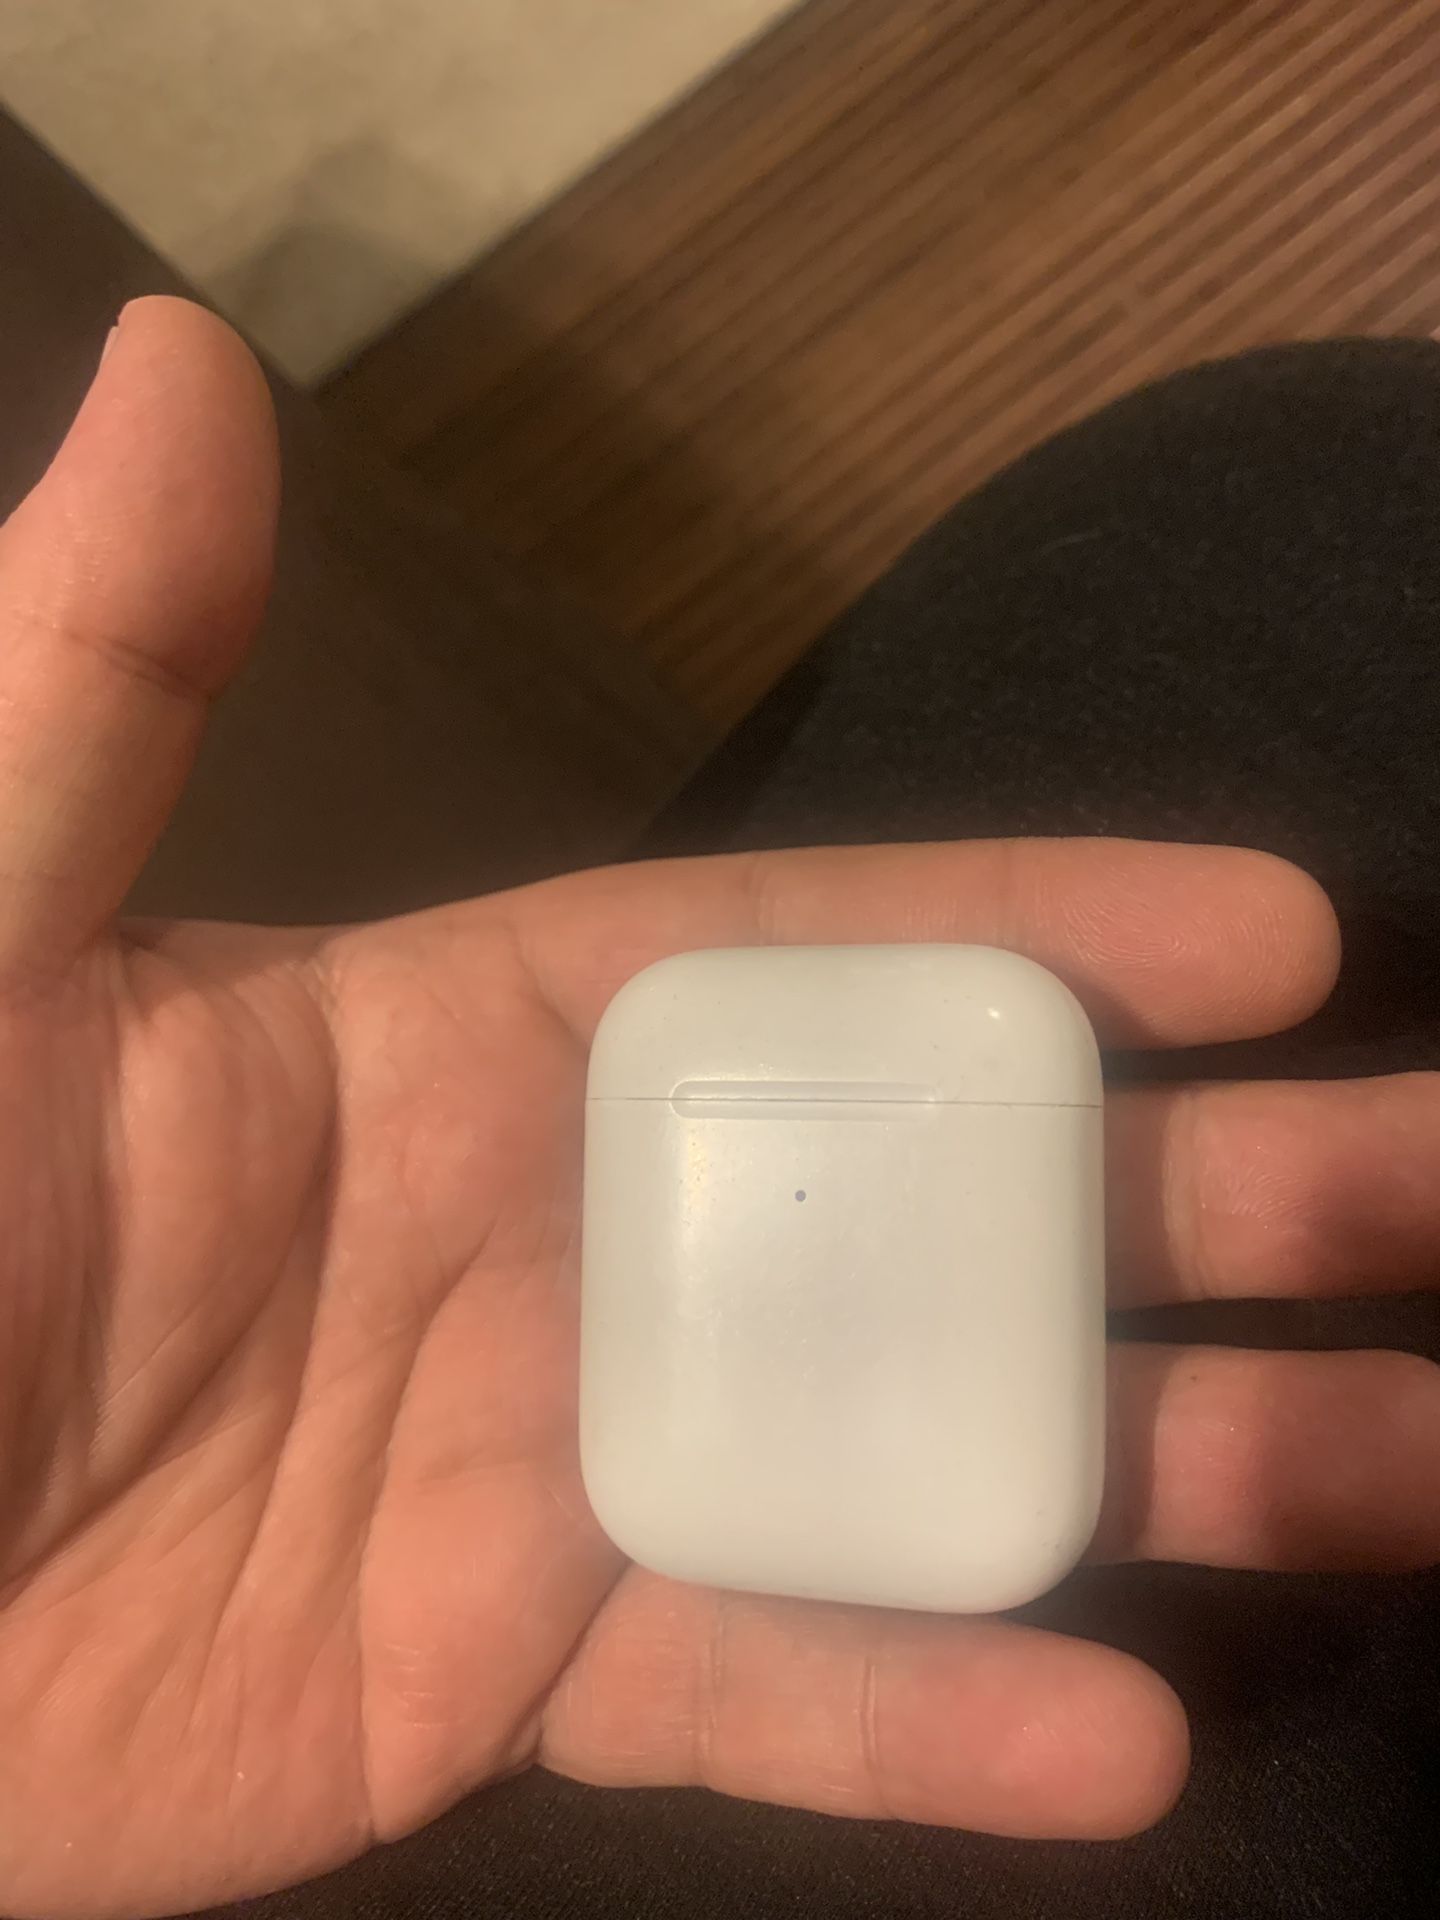 Apple Air pod Works Perfectly 